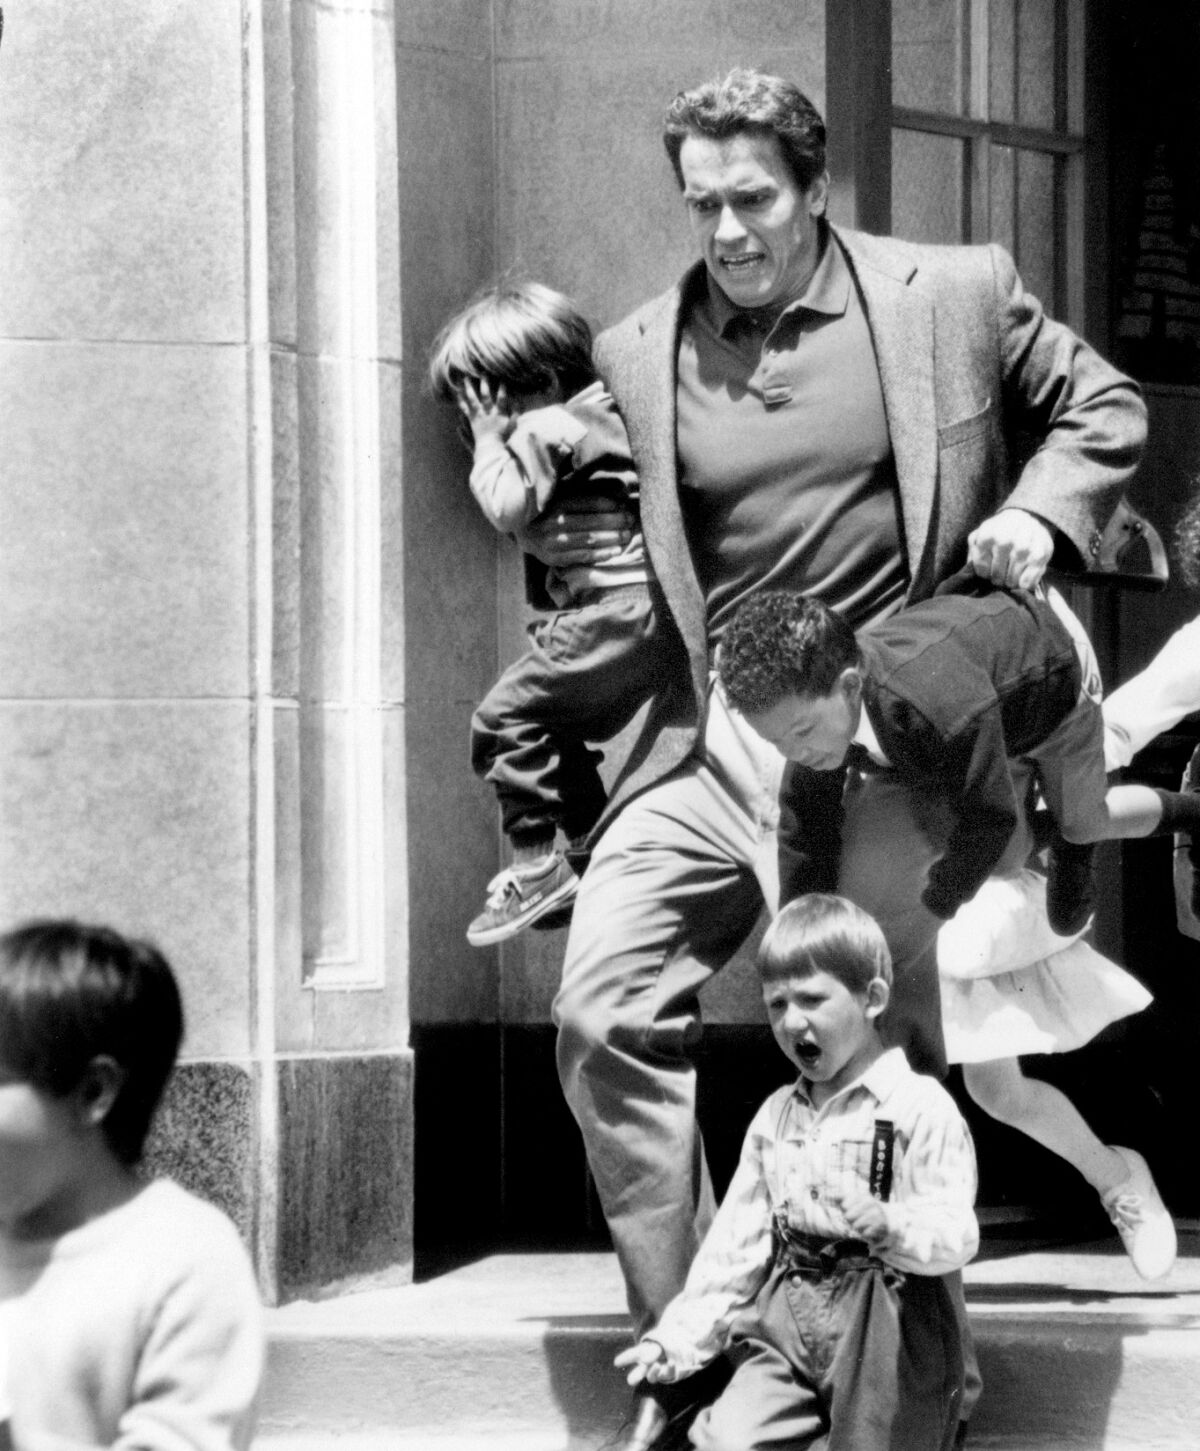 A man carries two small children down some steps.